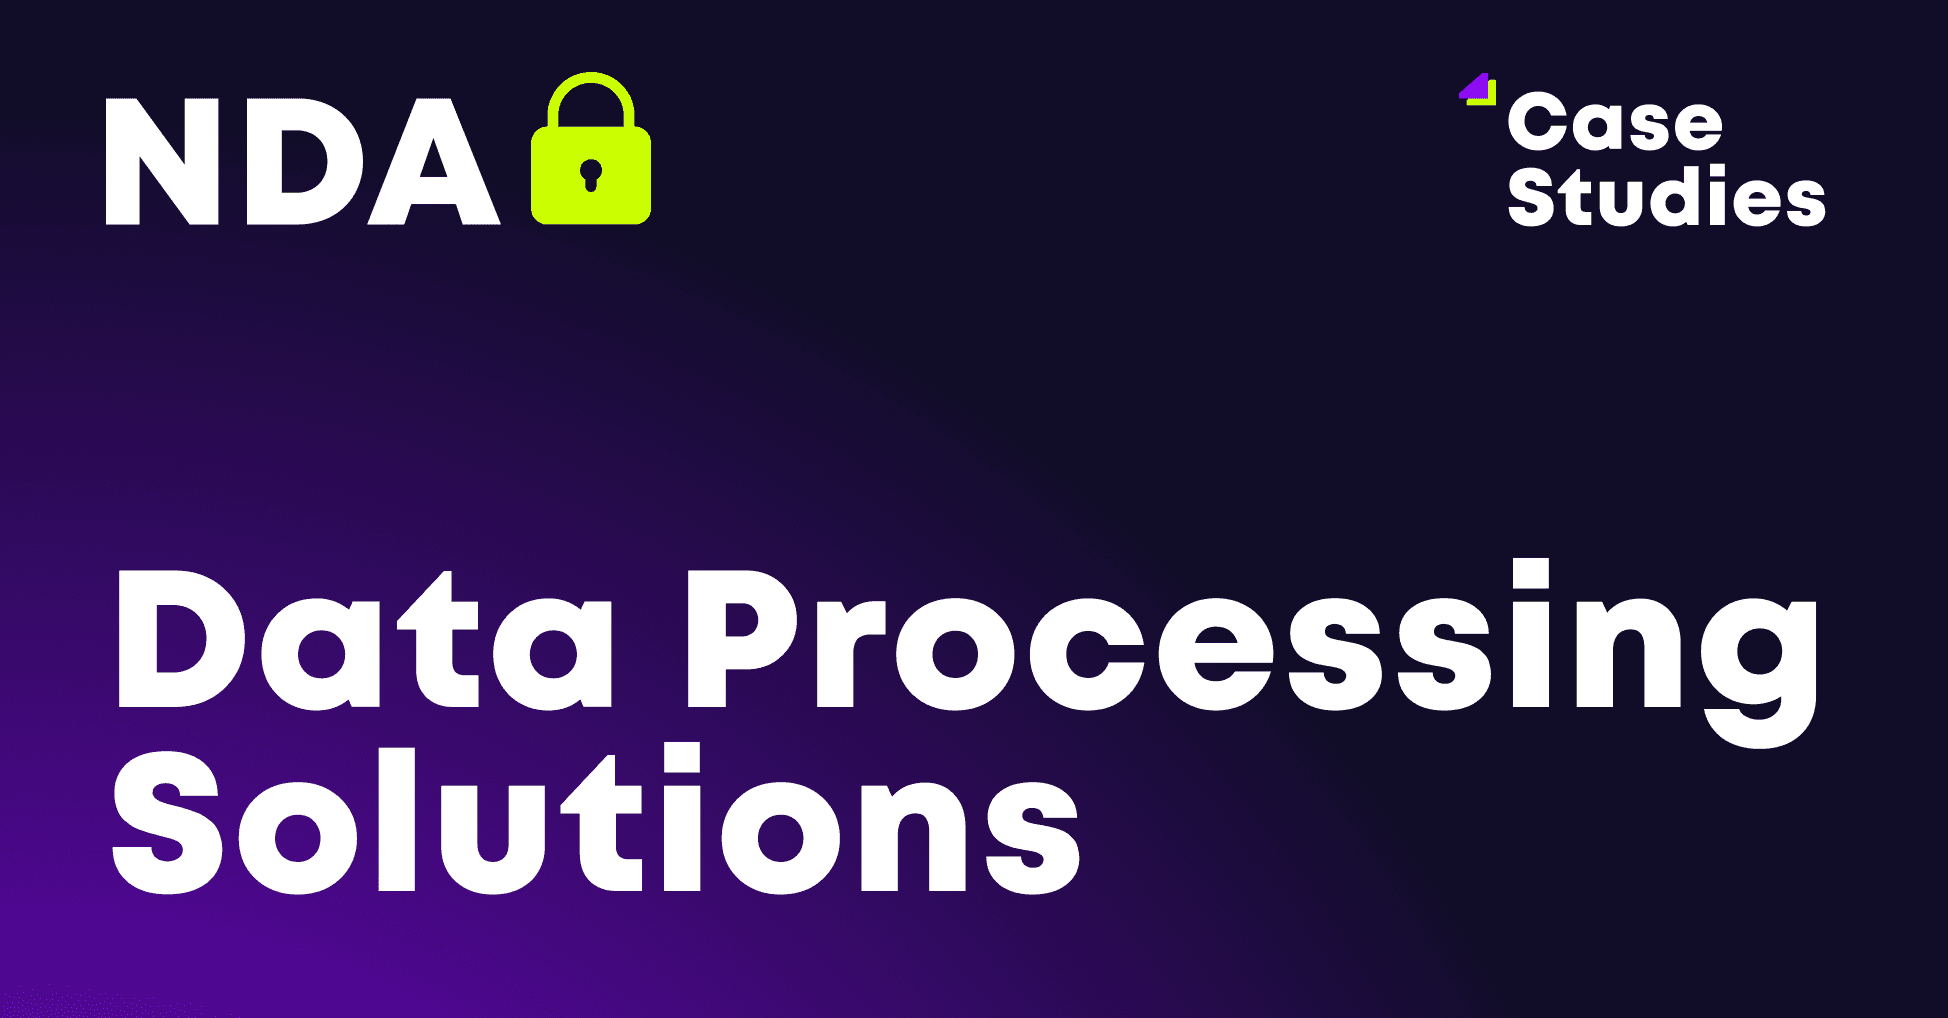 Data Processing Solutions Case Study